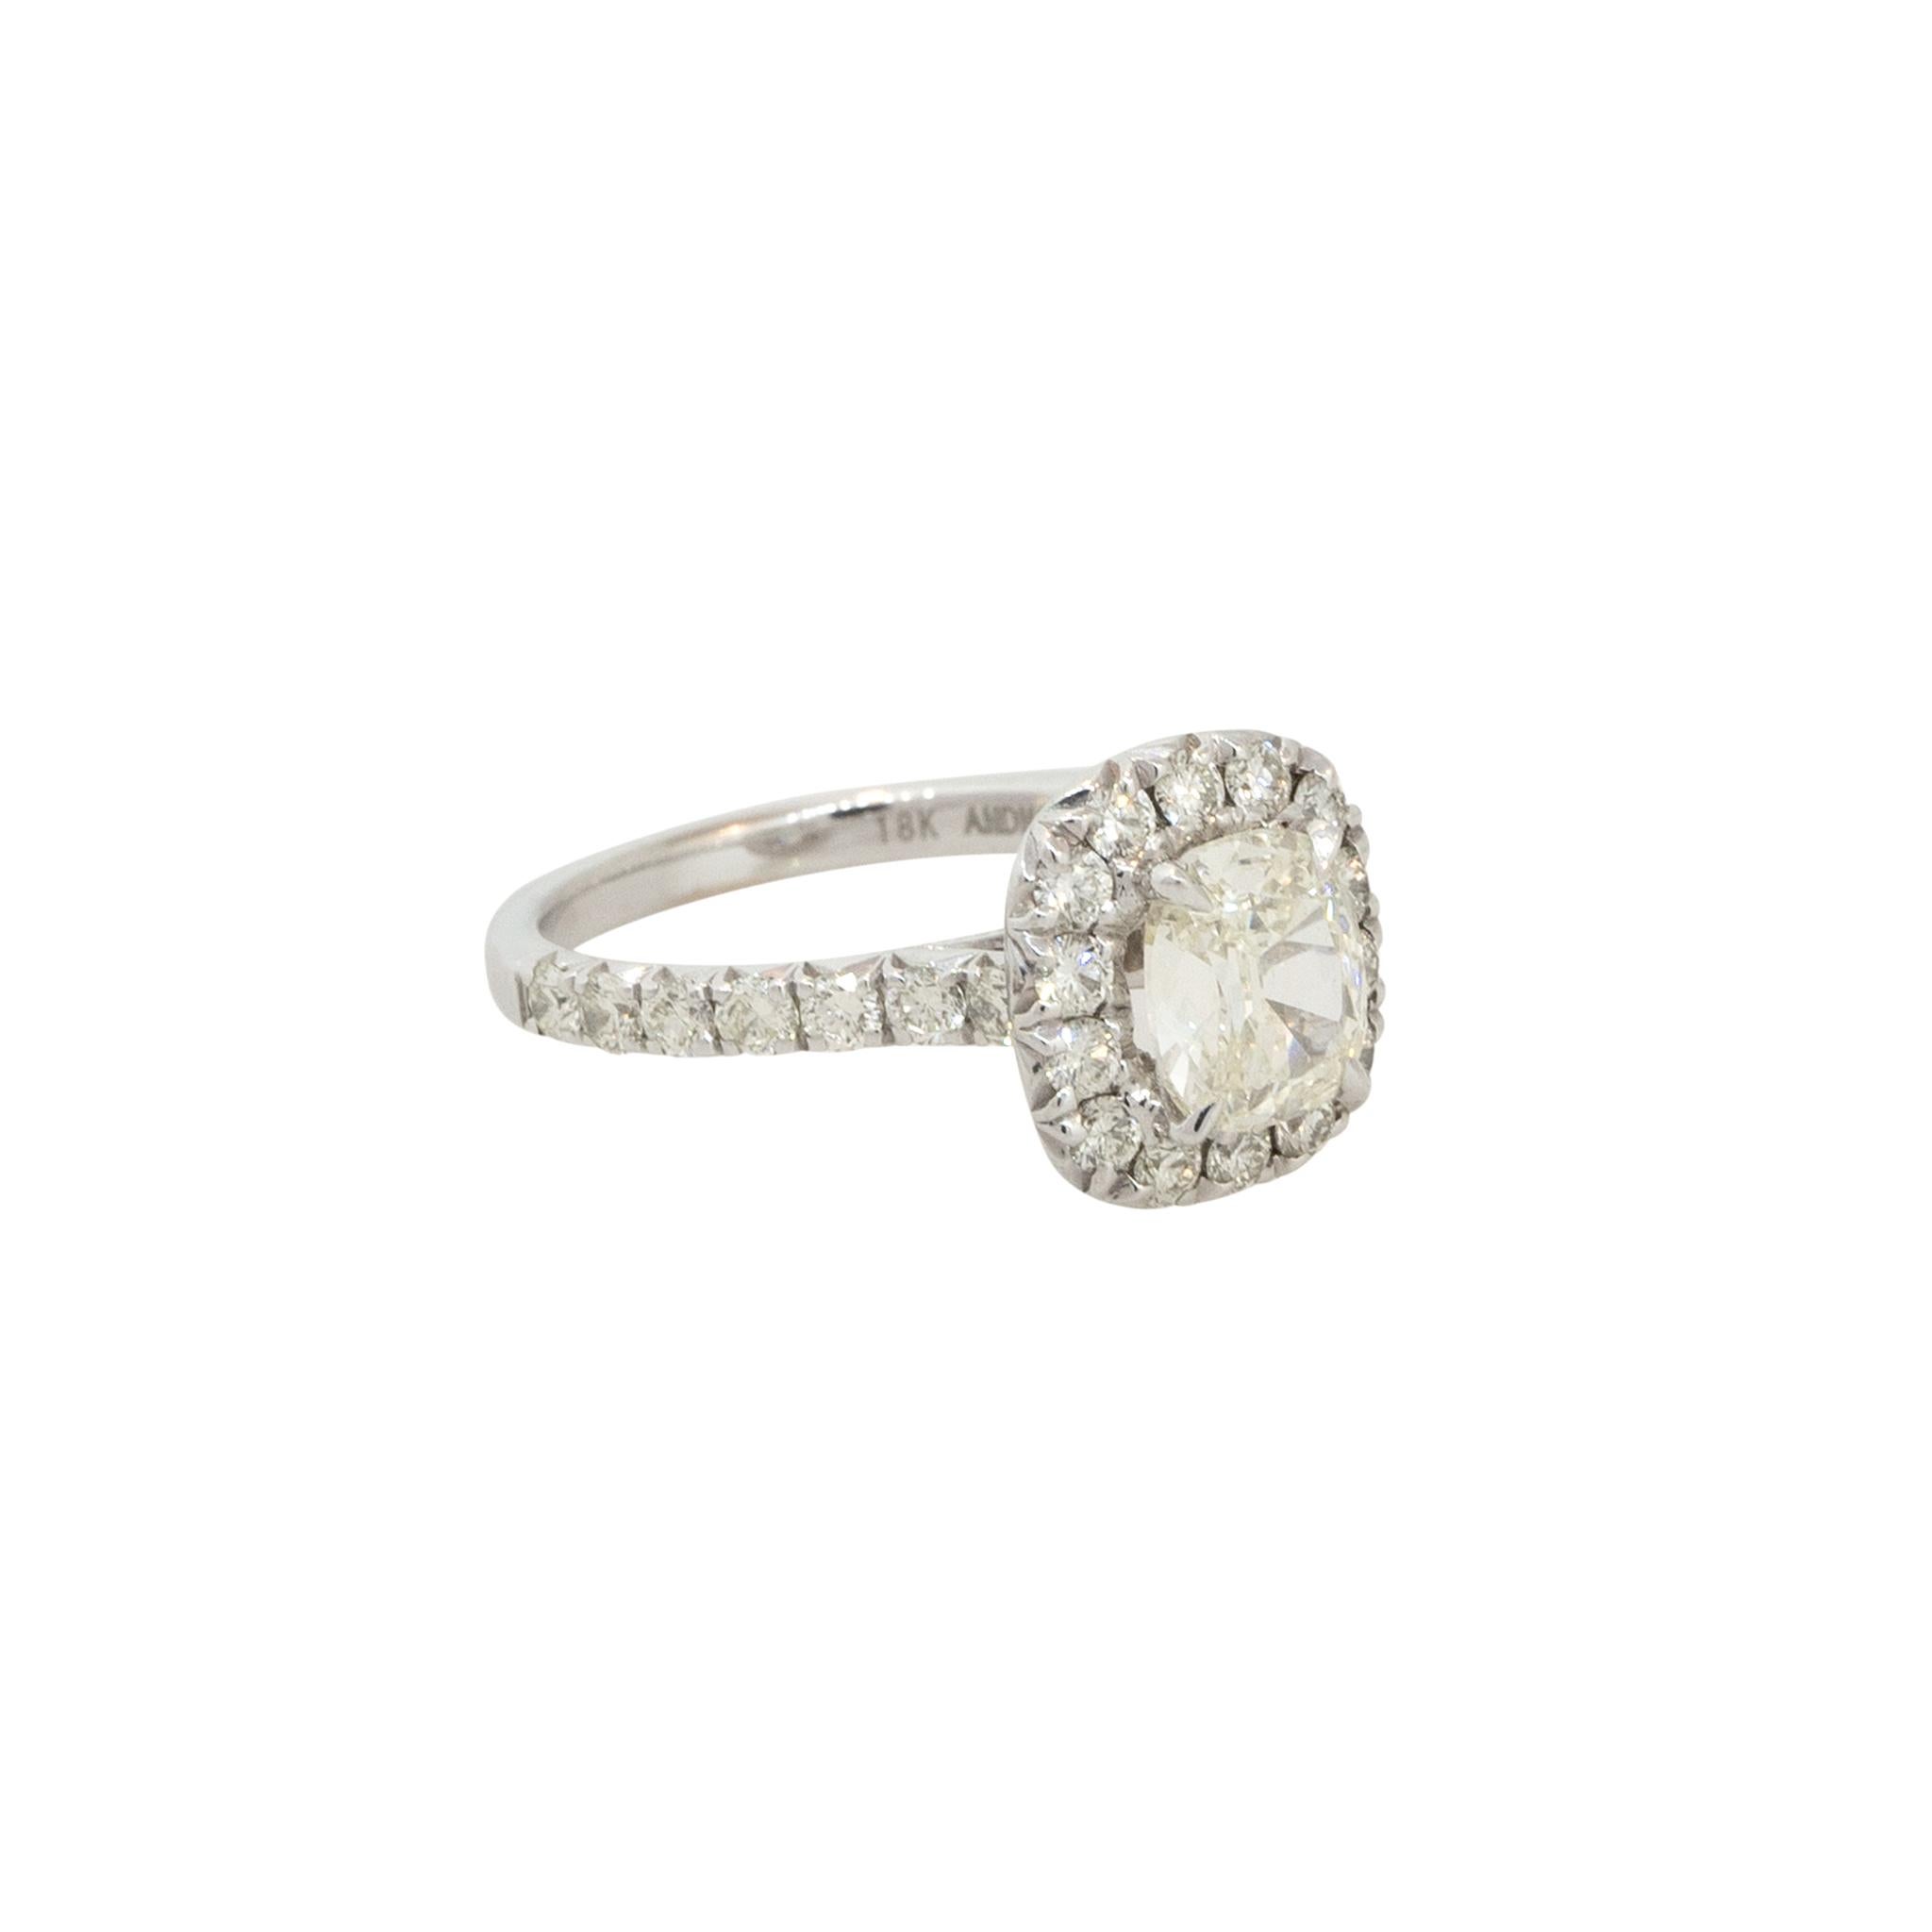 18k White Gold 1.78ctw Cushion Cut Diamond  Engagement Ring

Raymond Lee Jewelers in Boca Raton -- South Florida’s destination for diamonds, fine jewelry, antique jewelry, estate pieces, and vintage jewels.

Style: Women's 4 Prong Halo Engagement